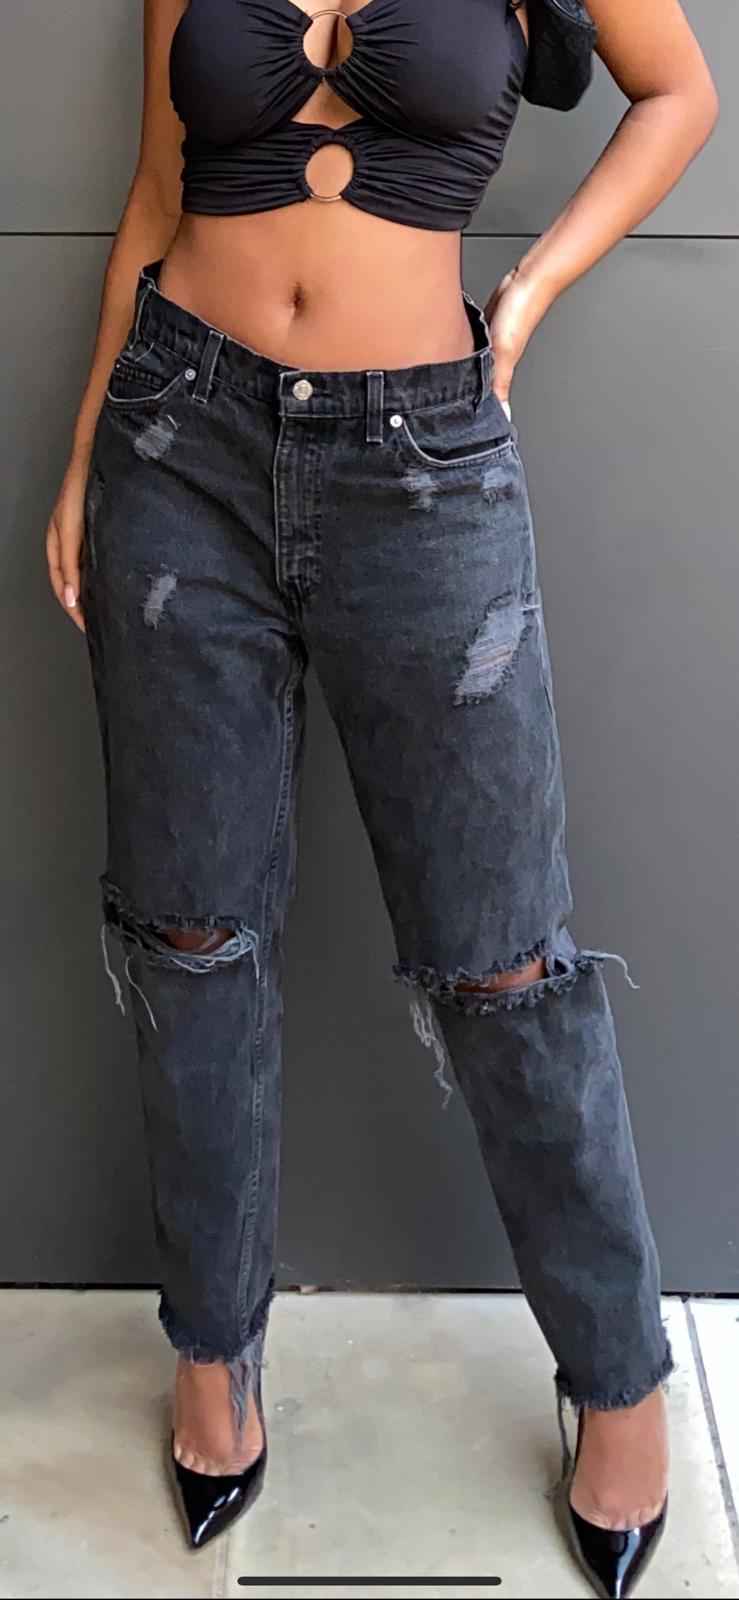 LEVI VINTAGE RIPPED JEANS IN BLACK